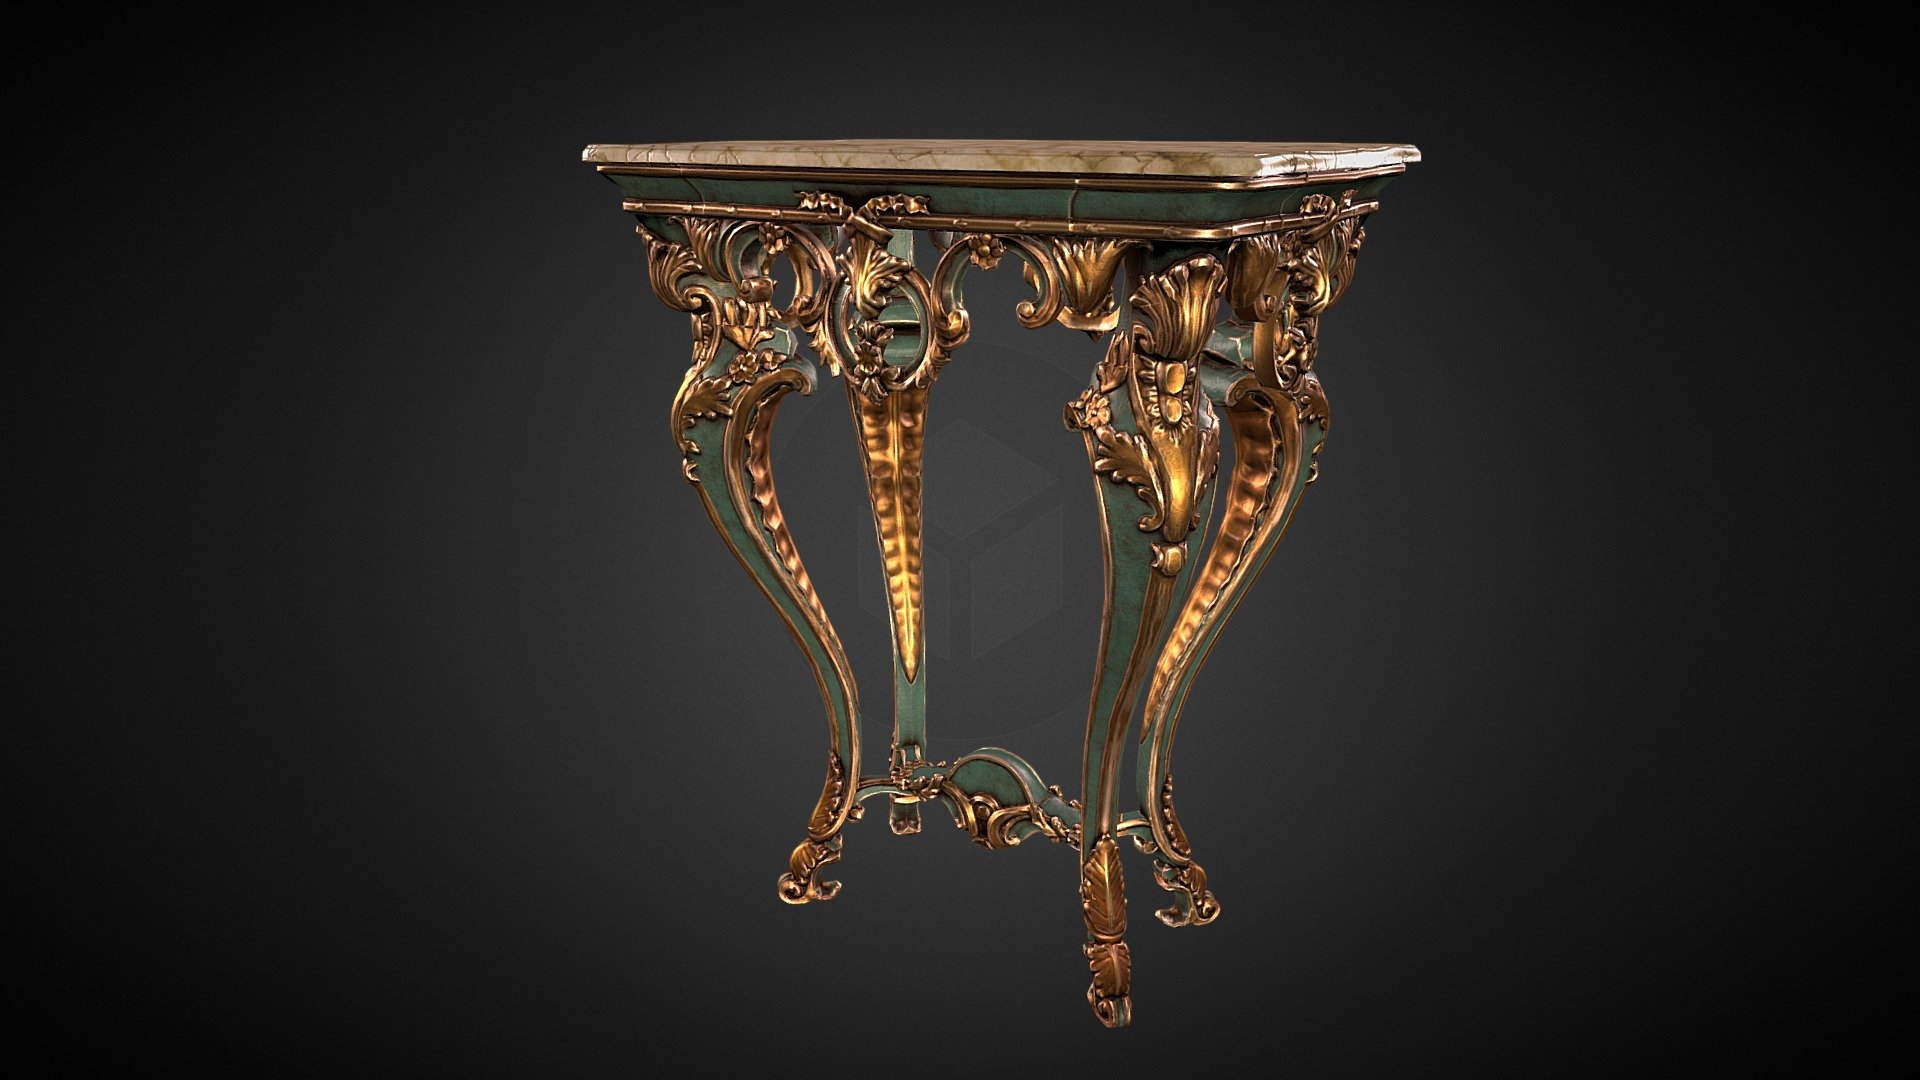 Rococo style table from a project in 2016 that I learned a lot from! Sculpted in Zbrush, retopologized in Maya, baked &amp; textured in Substance Painter - Rococo Table - 3D model by Christie McCown (@christiemccown) 3d model